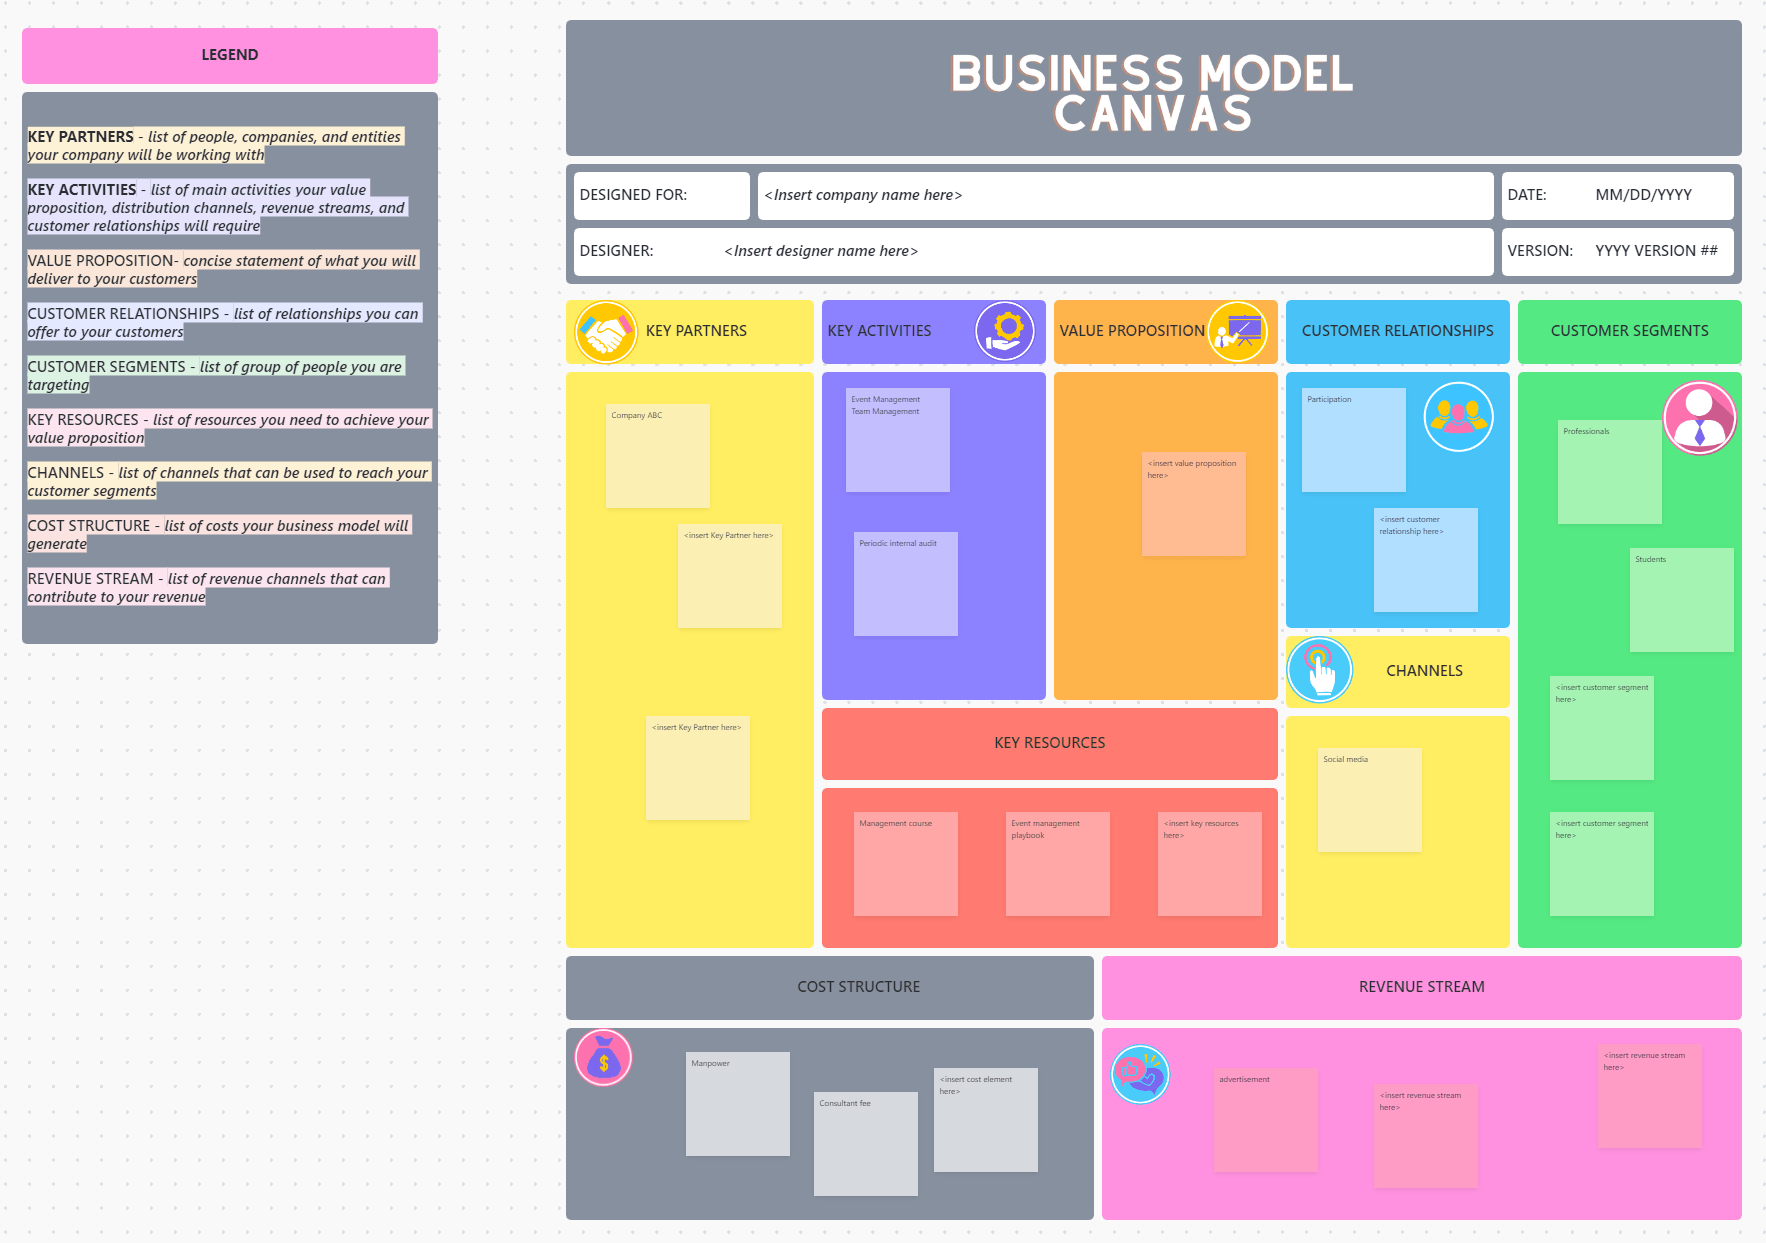 Business Model Canvas Template by ClickUp